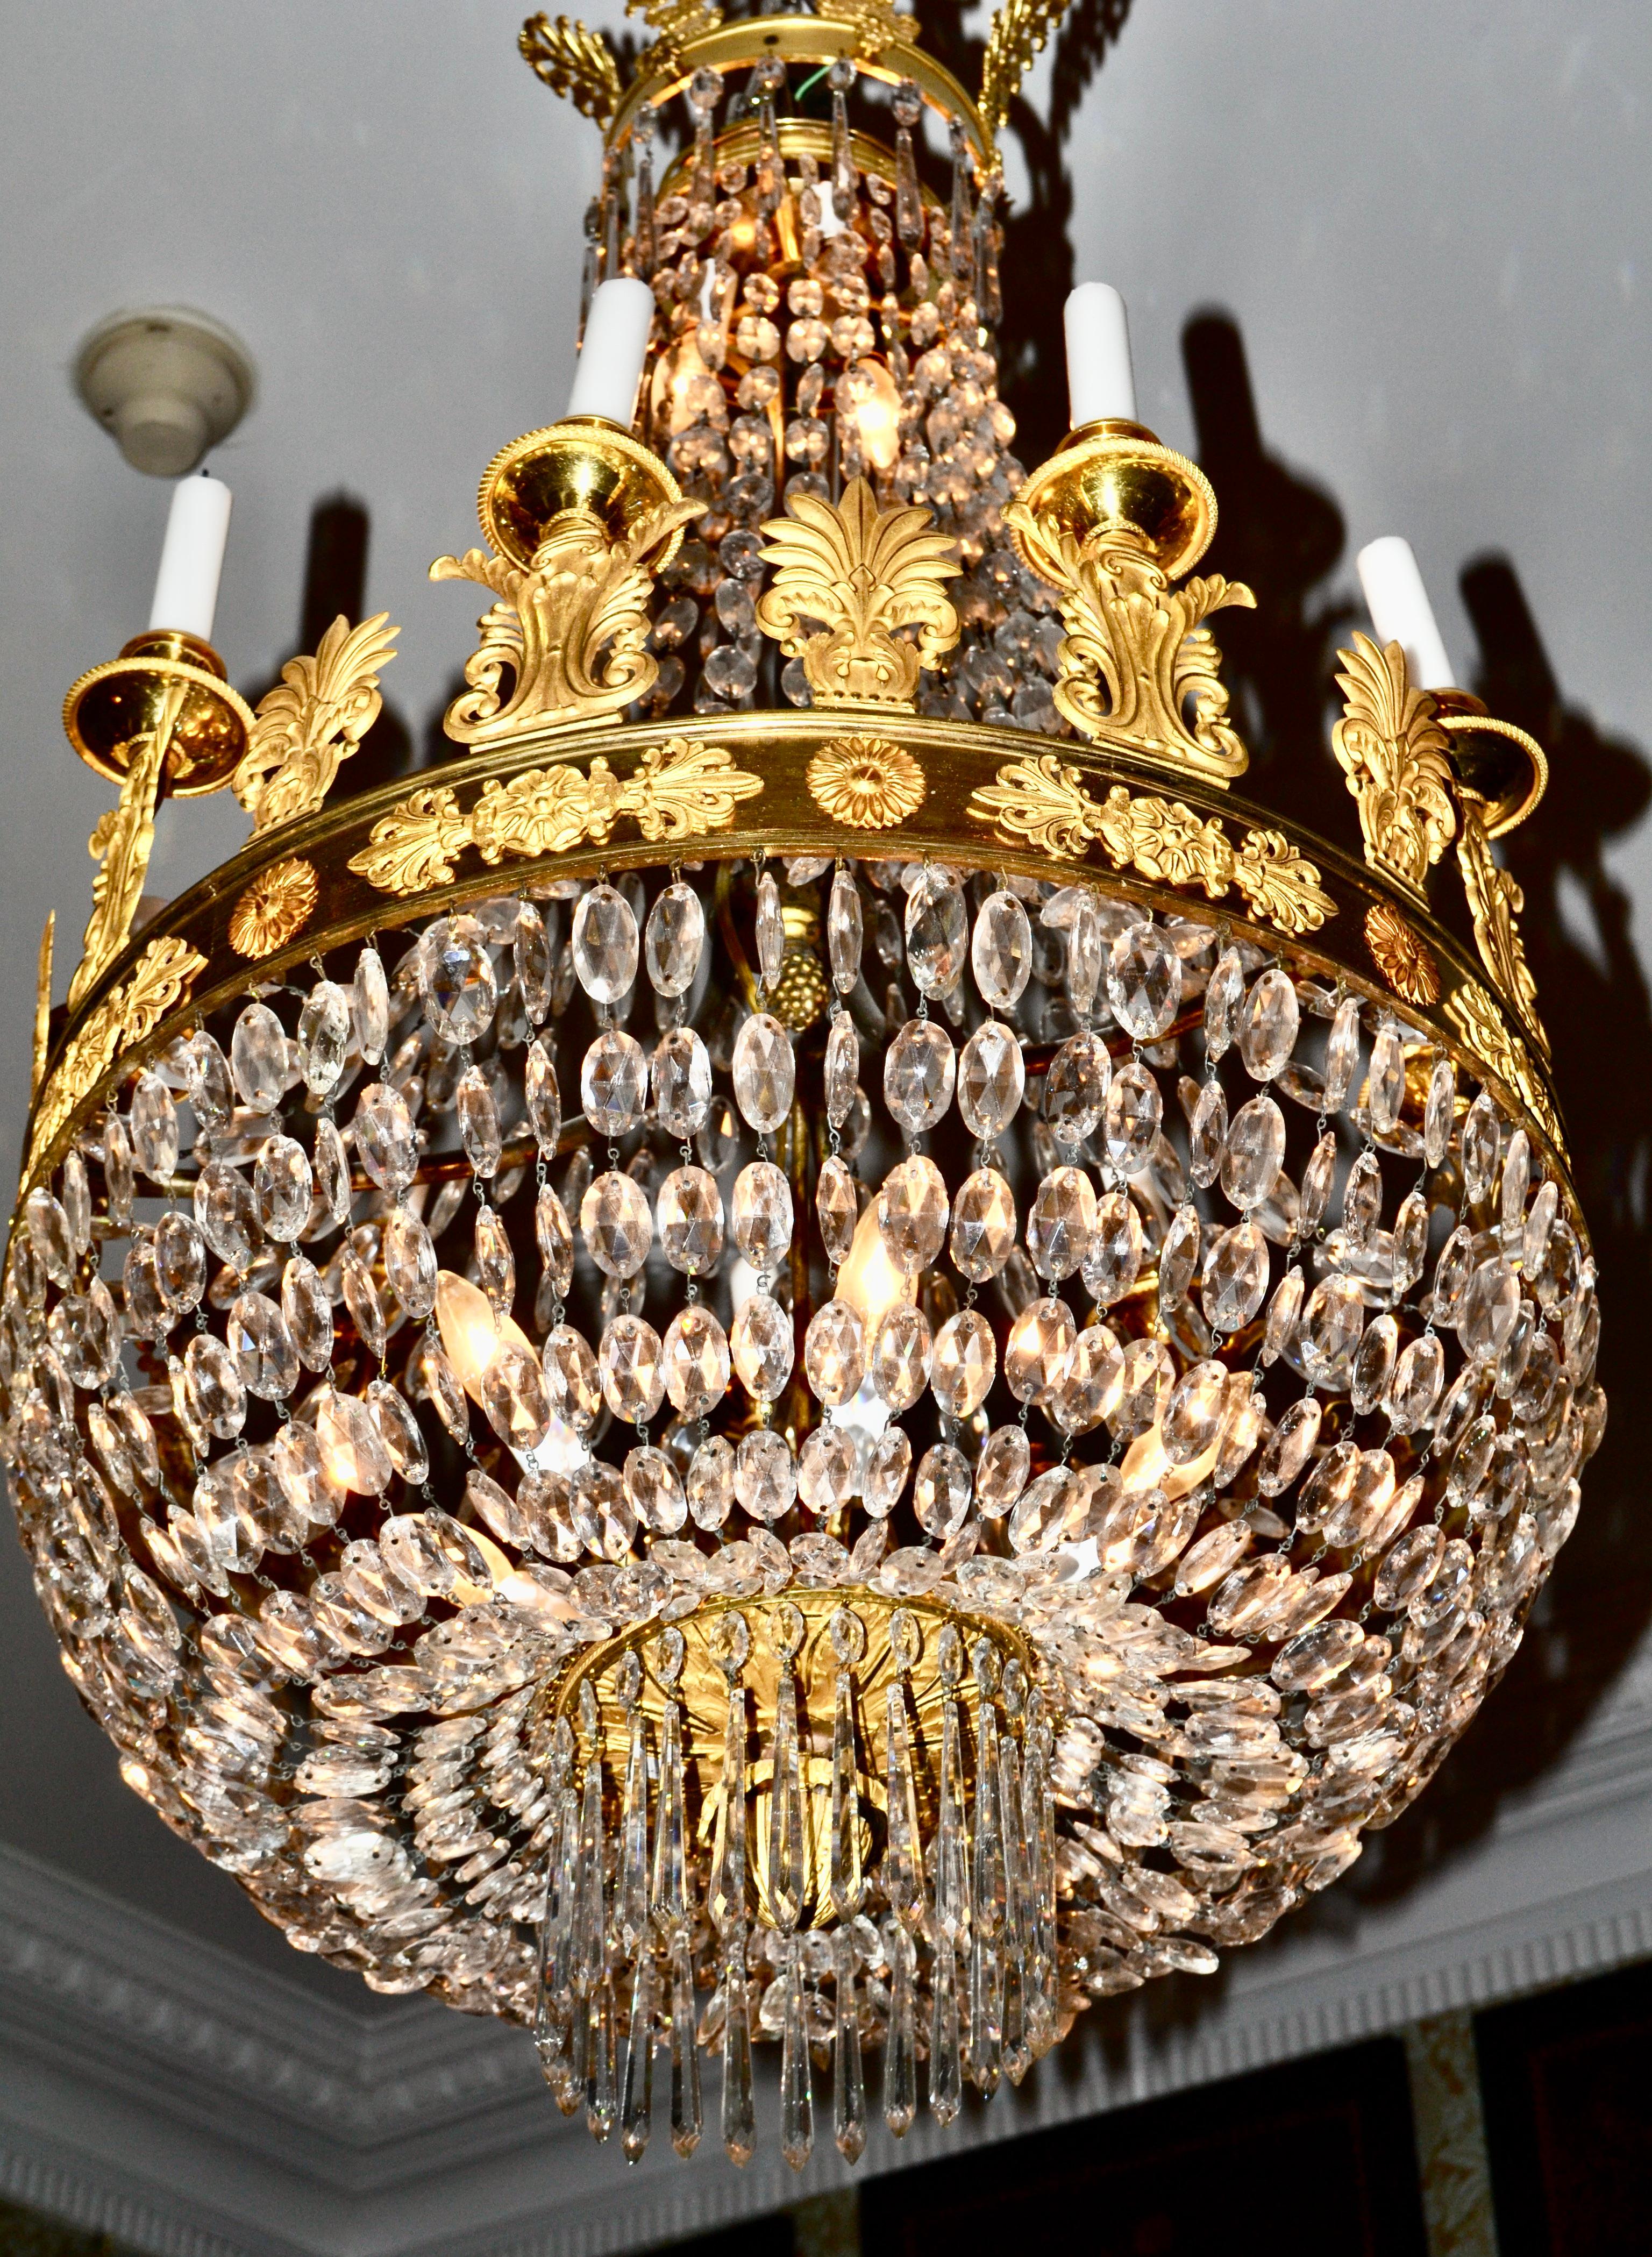 Early 19th Century French Empire Gilt Bronze and Crystal Basket Chandelier For Sale 3